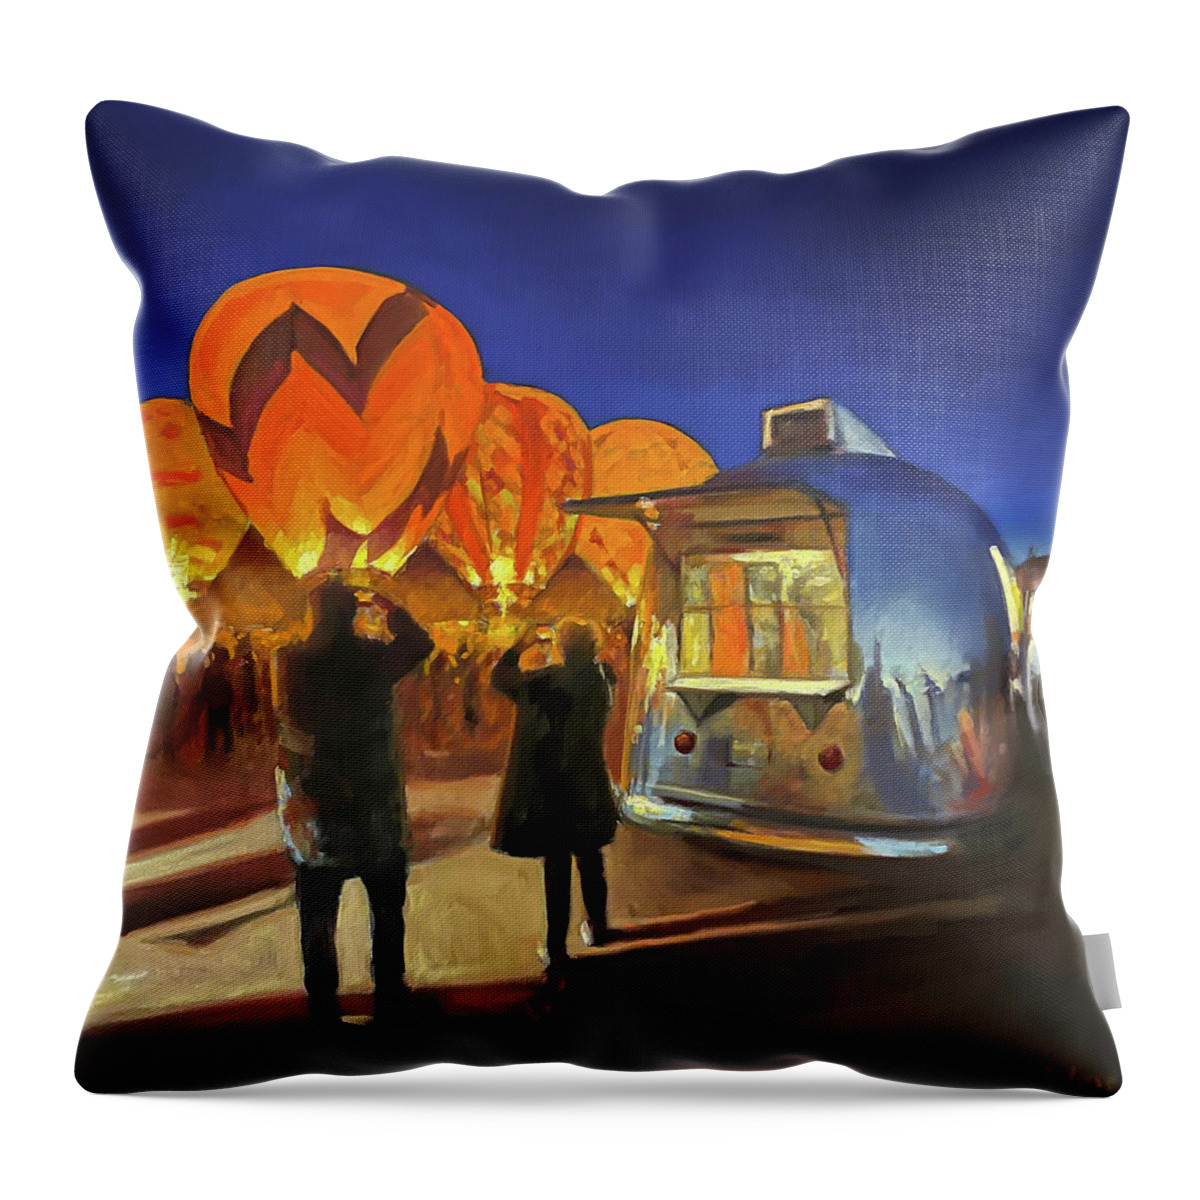 Airstream Throw Pillow featuring the painting Balloon Glow by Elizabeth Jose